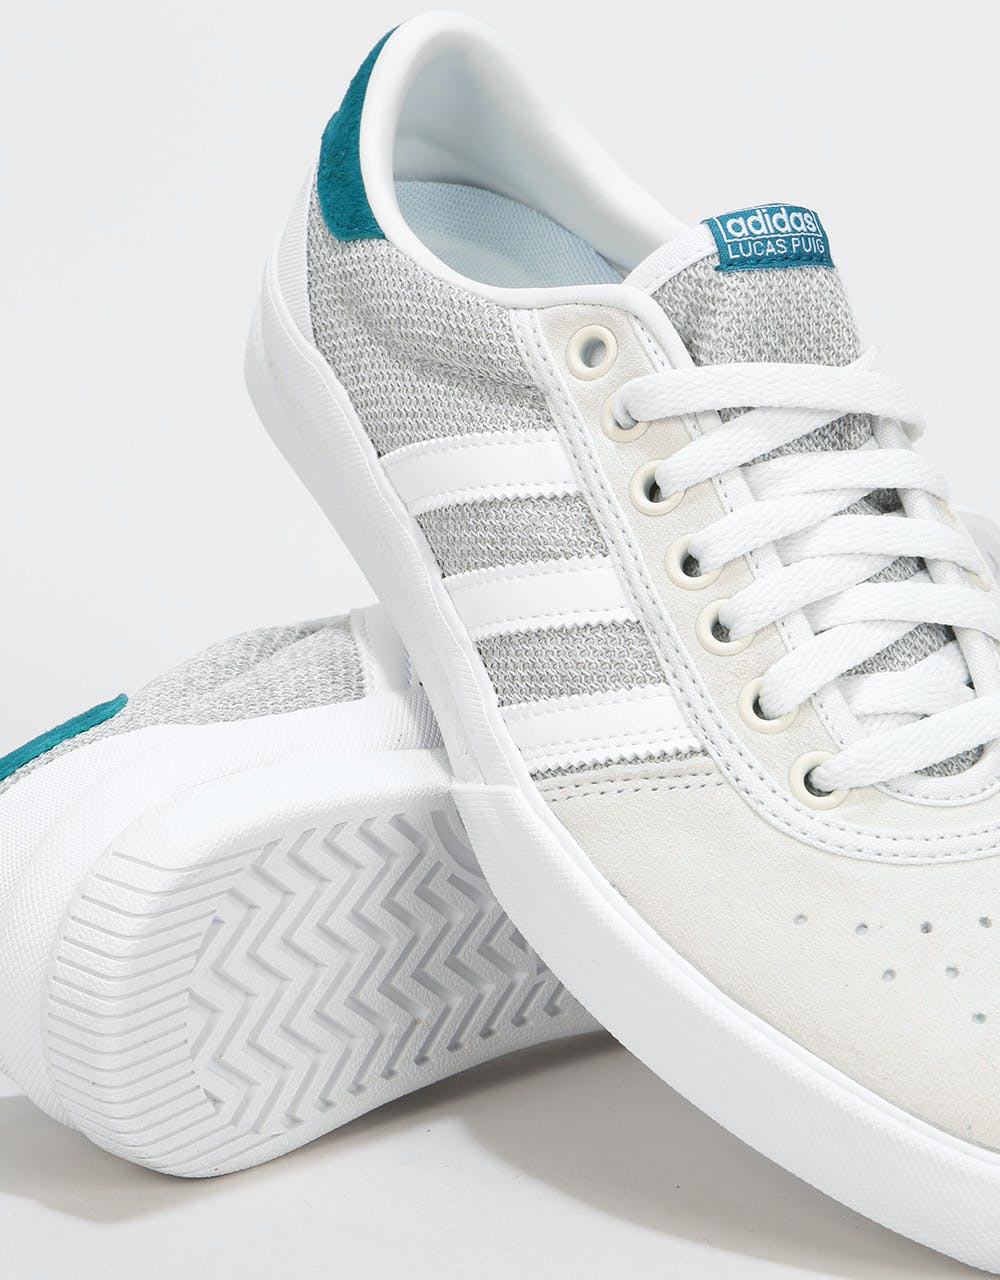 Adidas Lucas Premiere Skate Shoes - White/Solid Grey/Real Teal